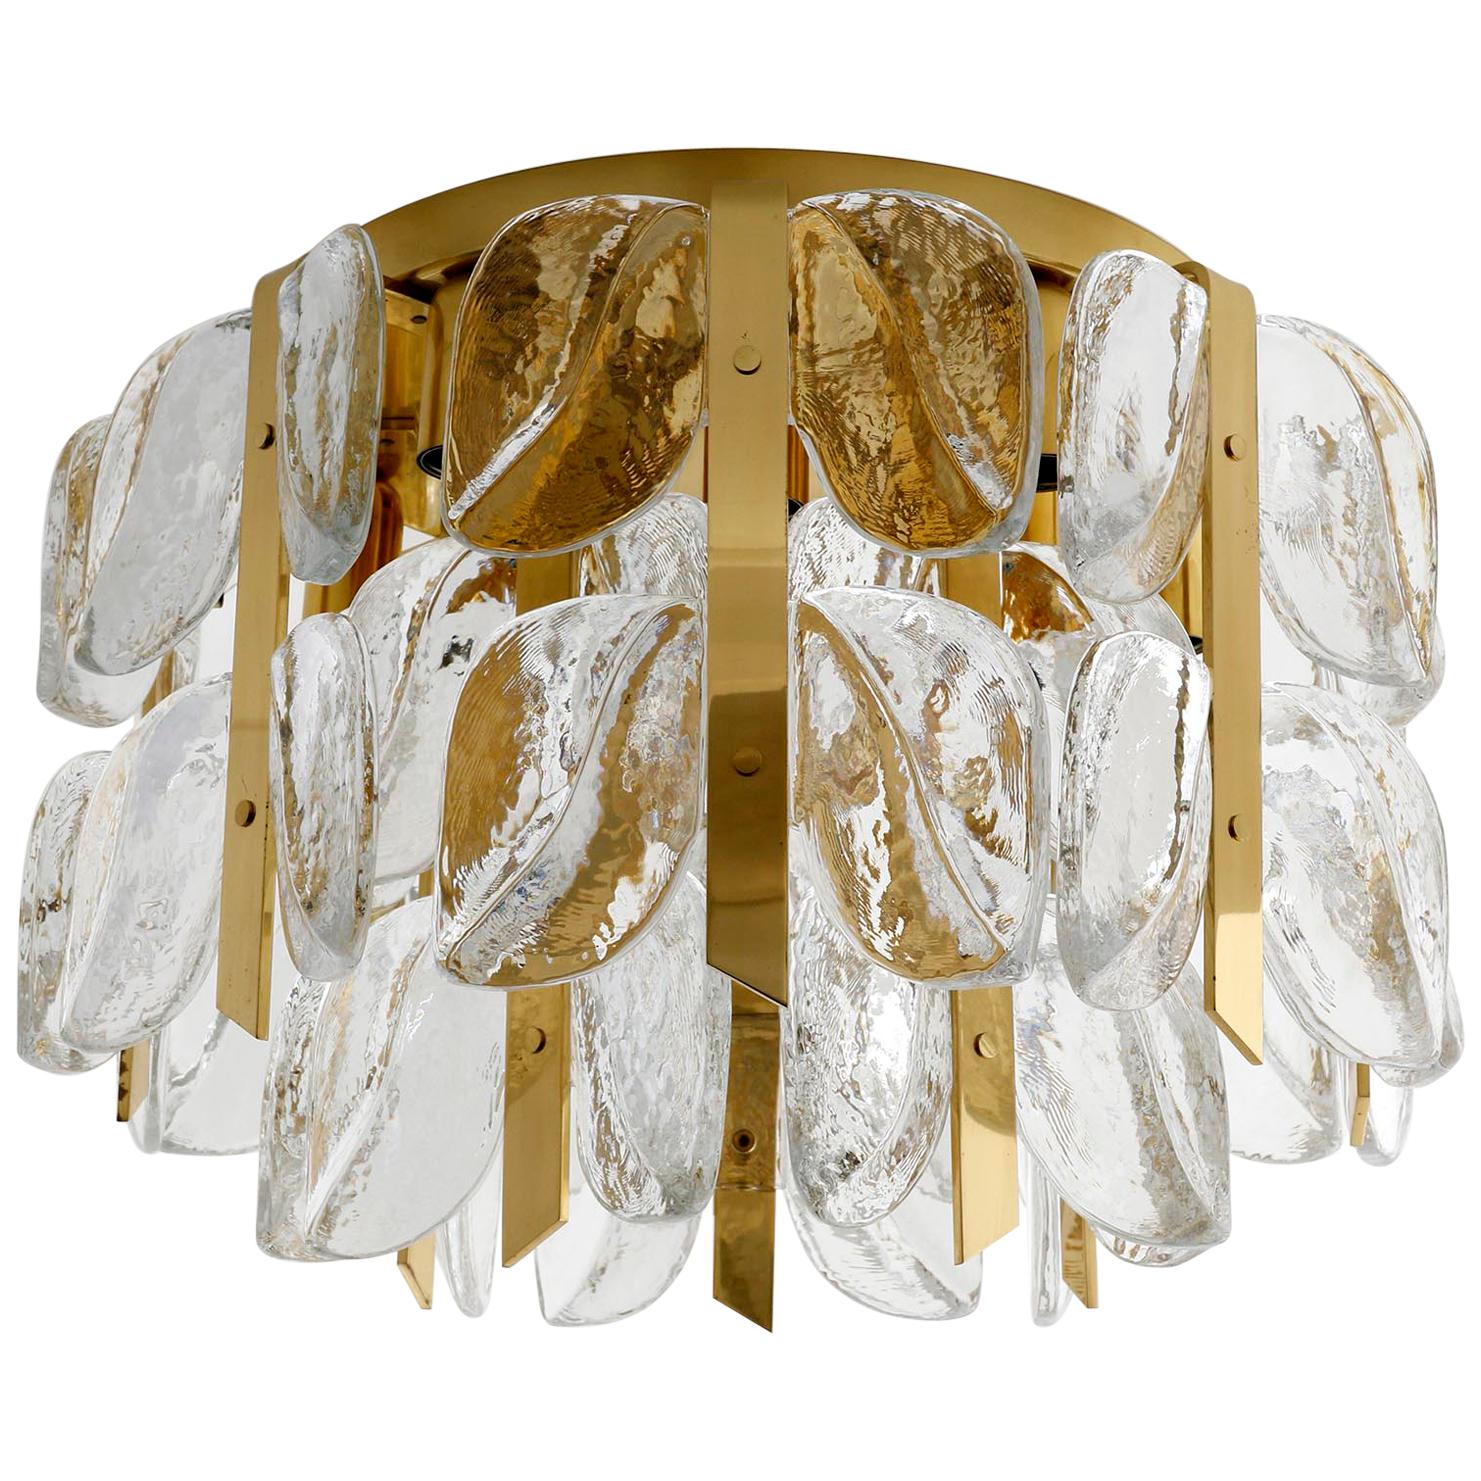 One of two high quality lights model 'Florida' by J.T. Kalmar, Austria, manufactured in midcentury, circa 1970 (late 1960s or early 1970s).
These Hollywood Regency lights are made of polished brass and large fire-polished brilliant crystal glasses